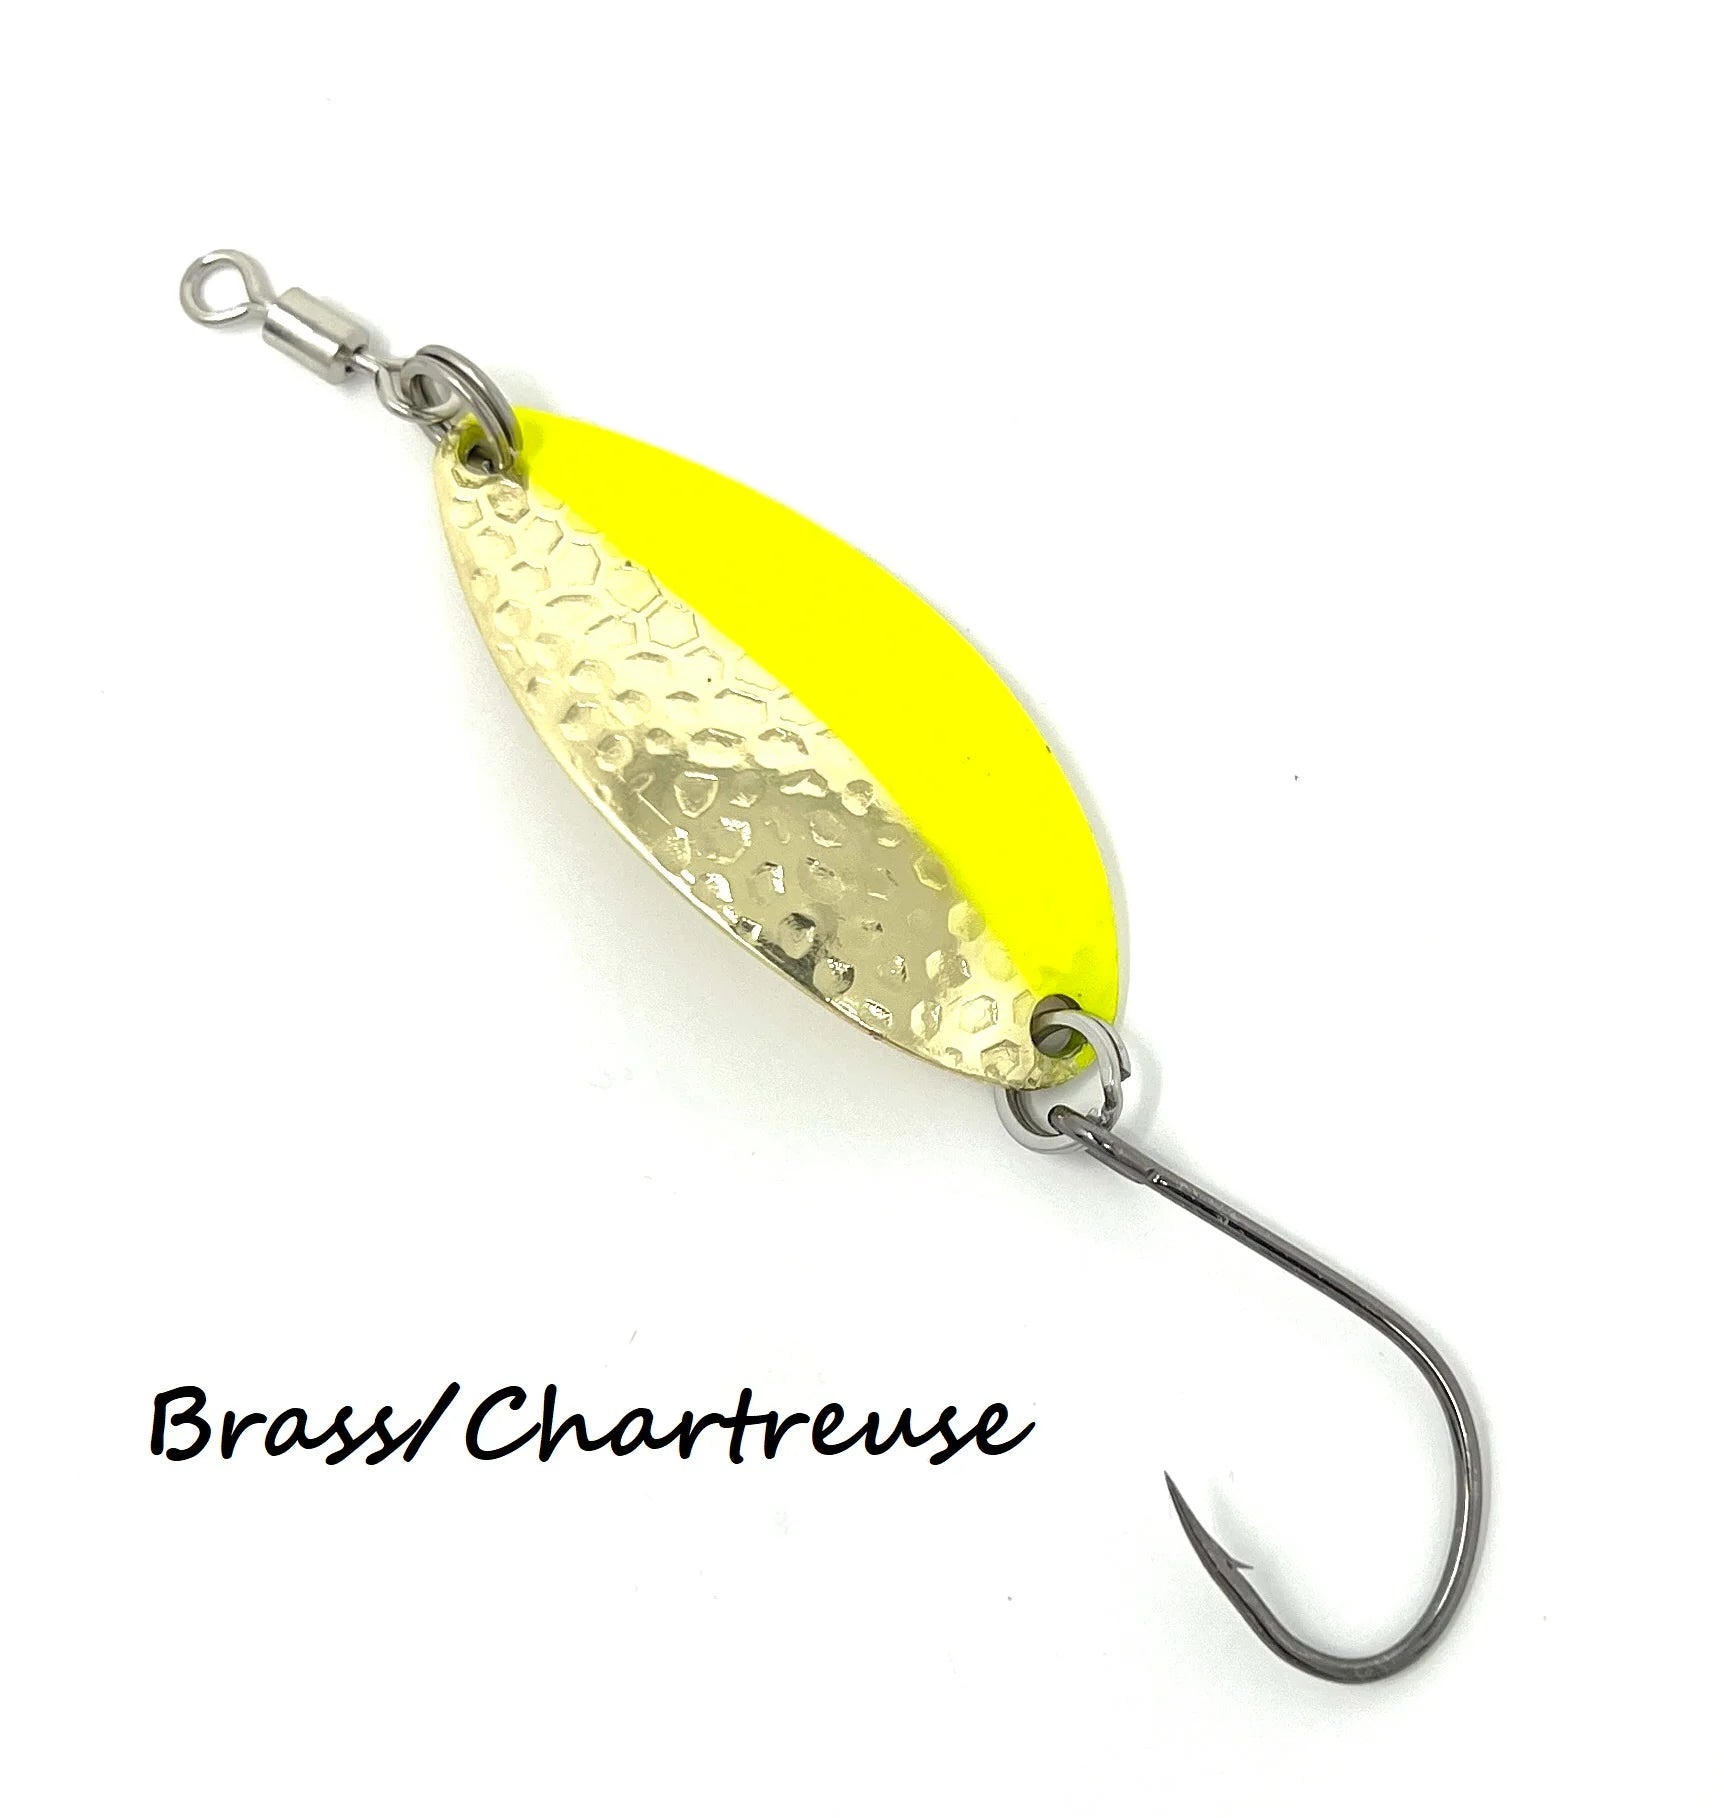 The Glory Spoon By Prime Lures